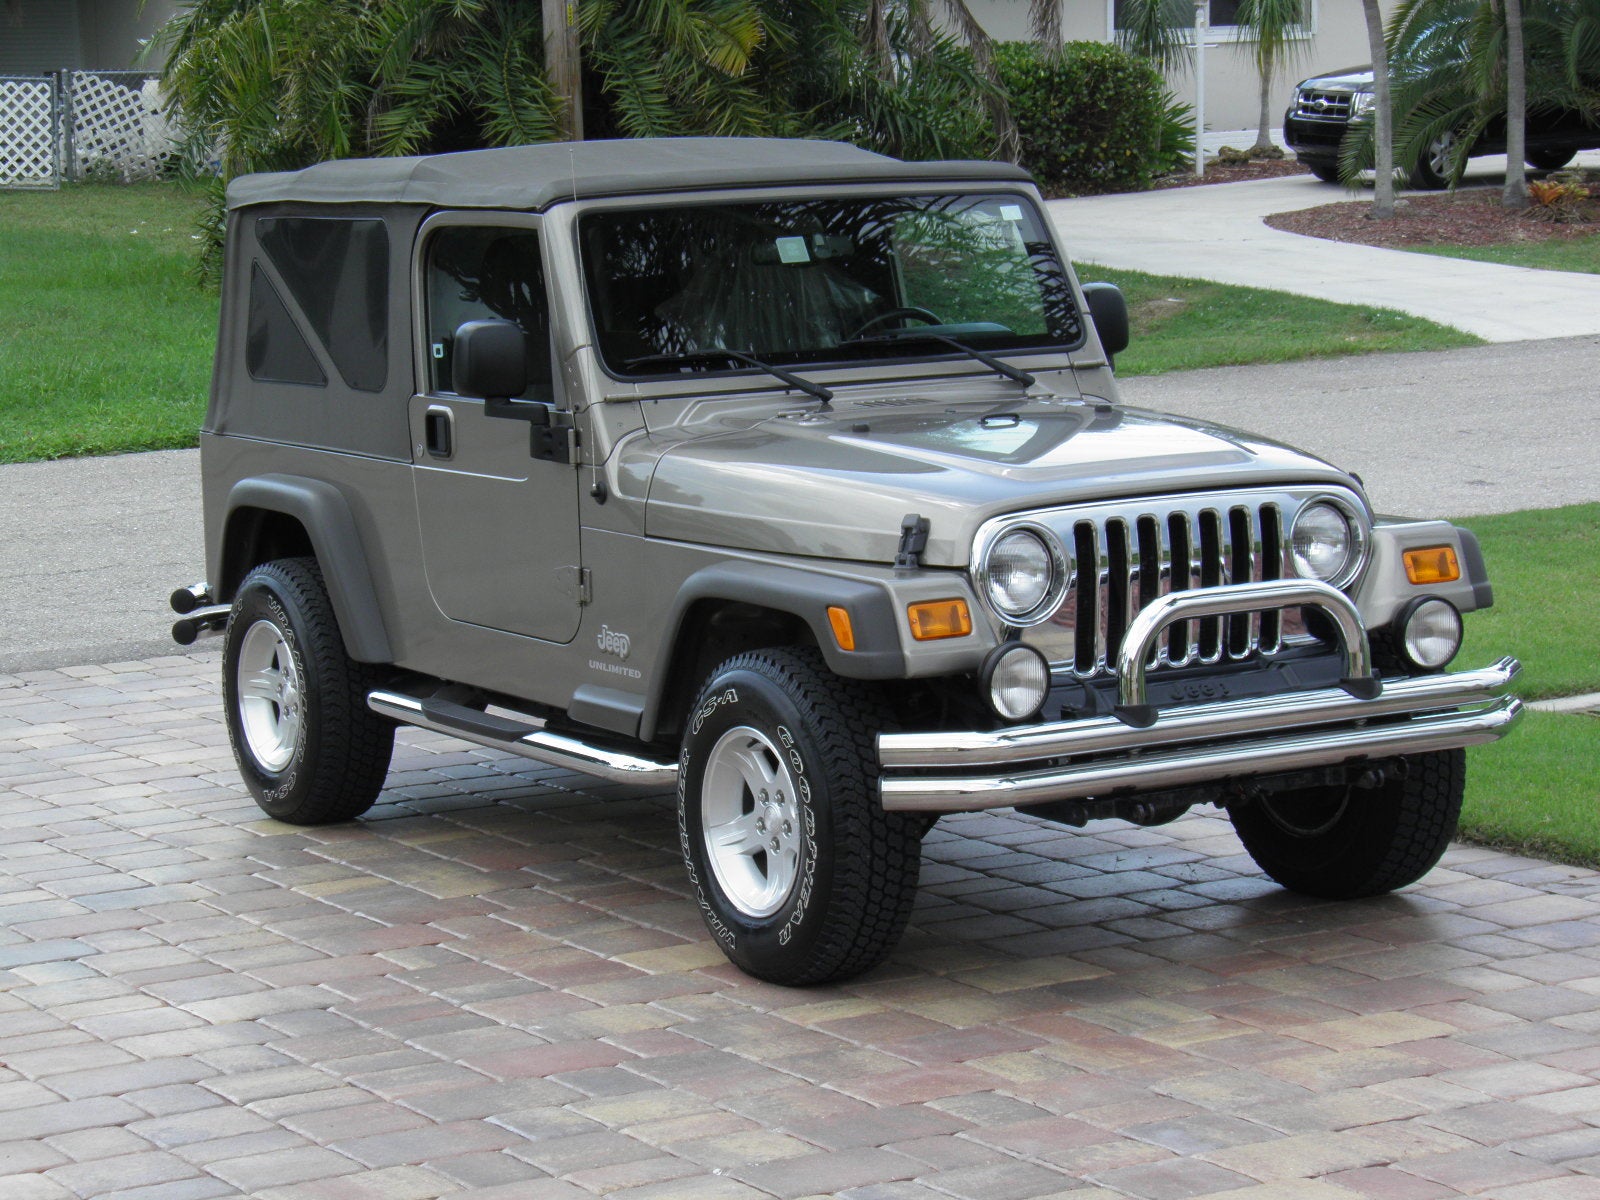 2005 Limited edition jeep wrangler rubicon unlimited sahara #5